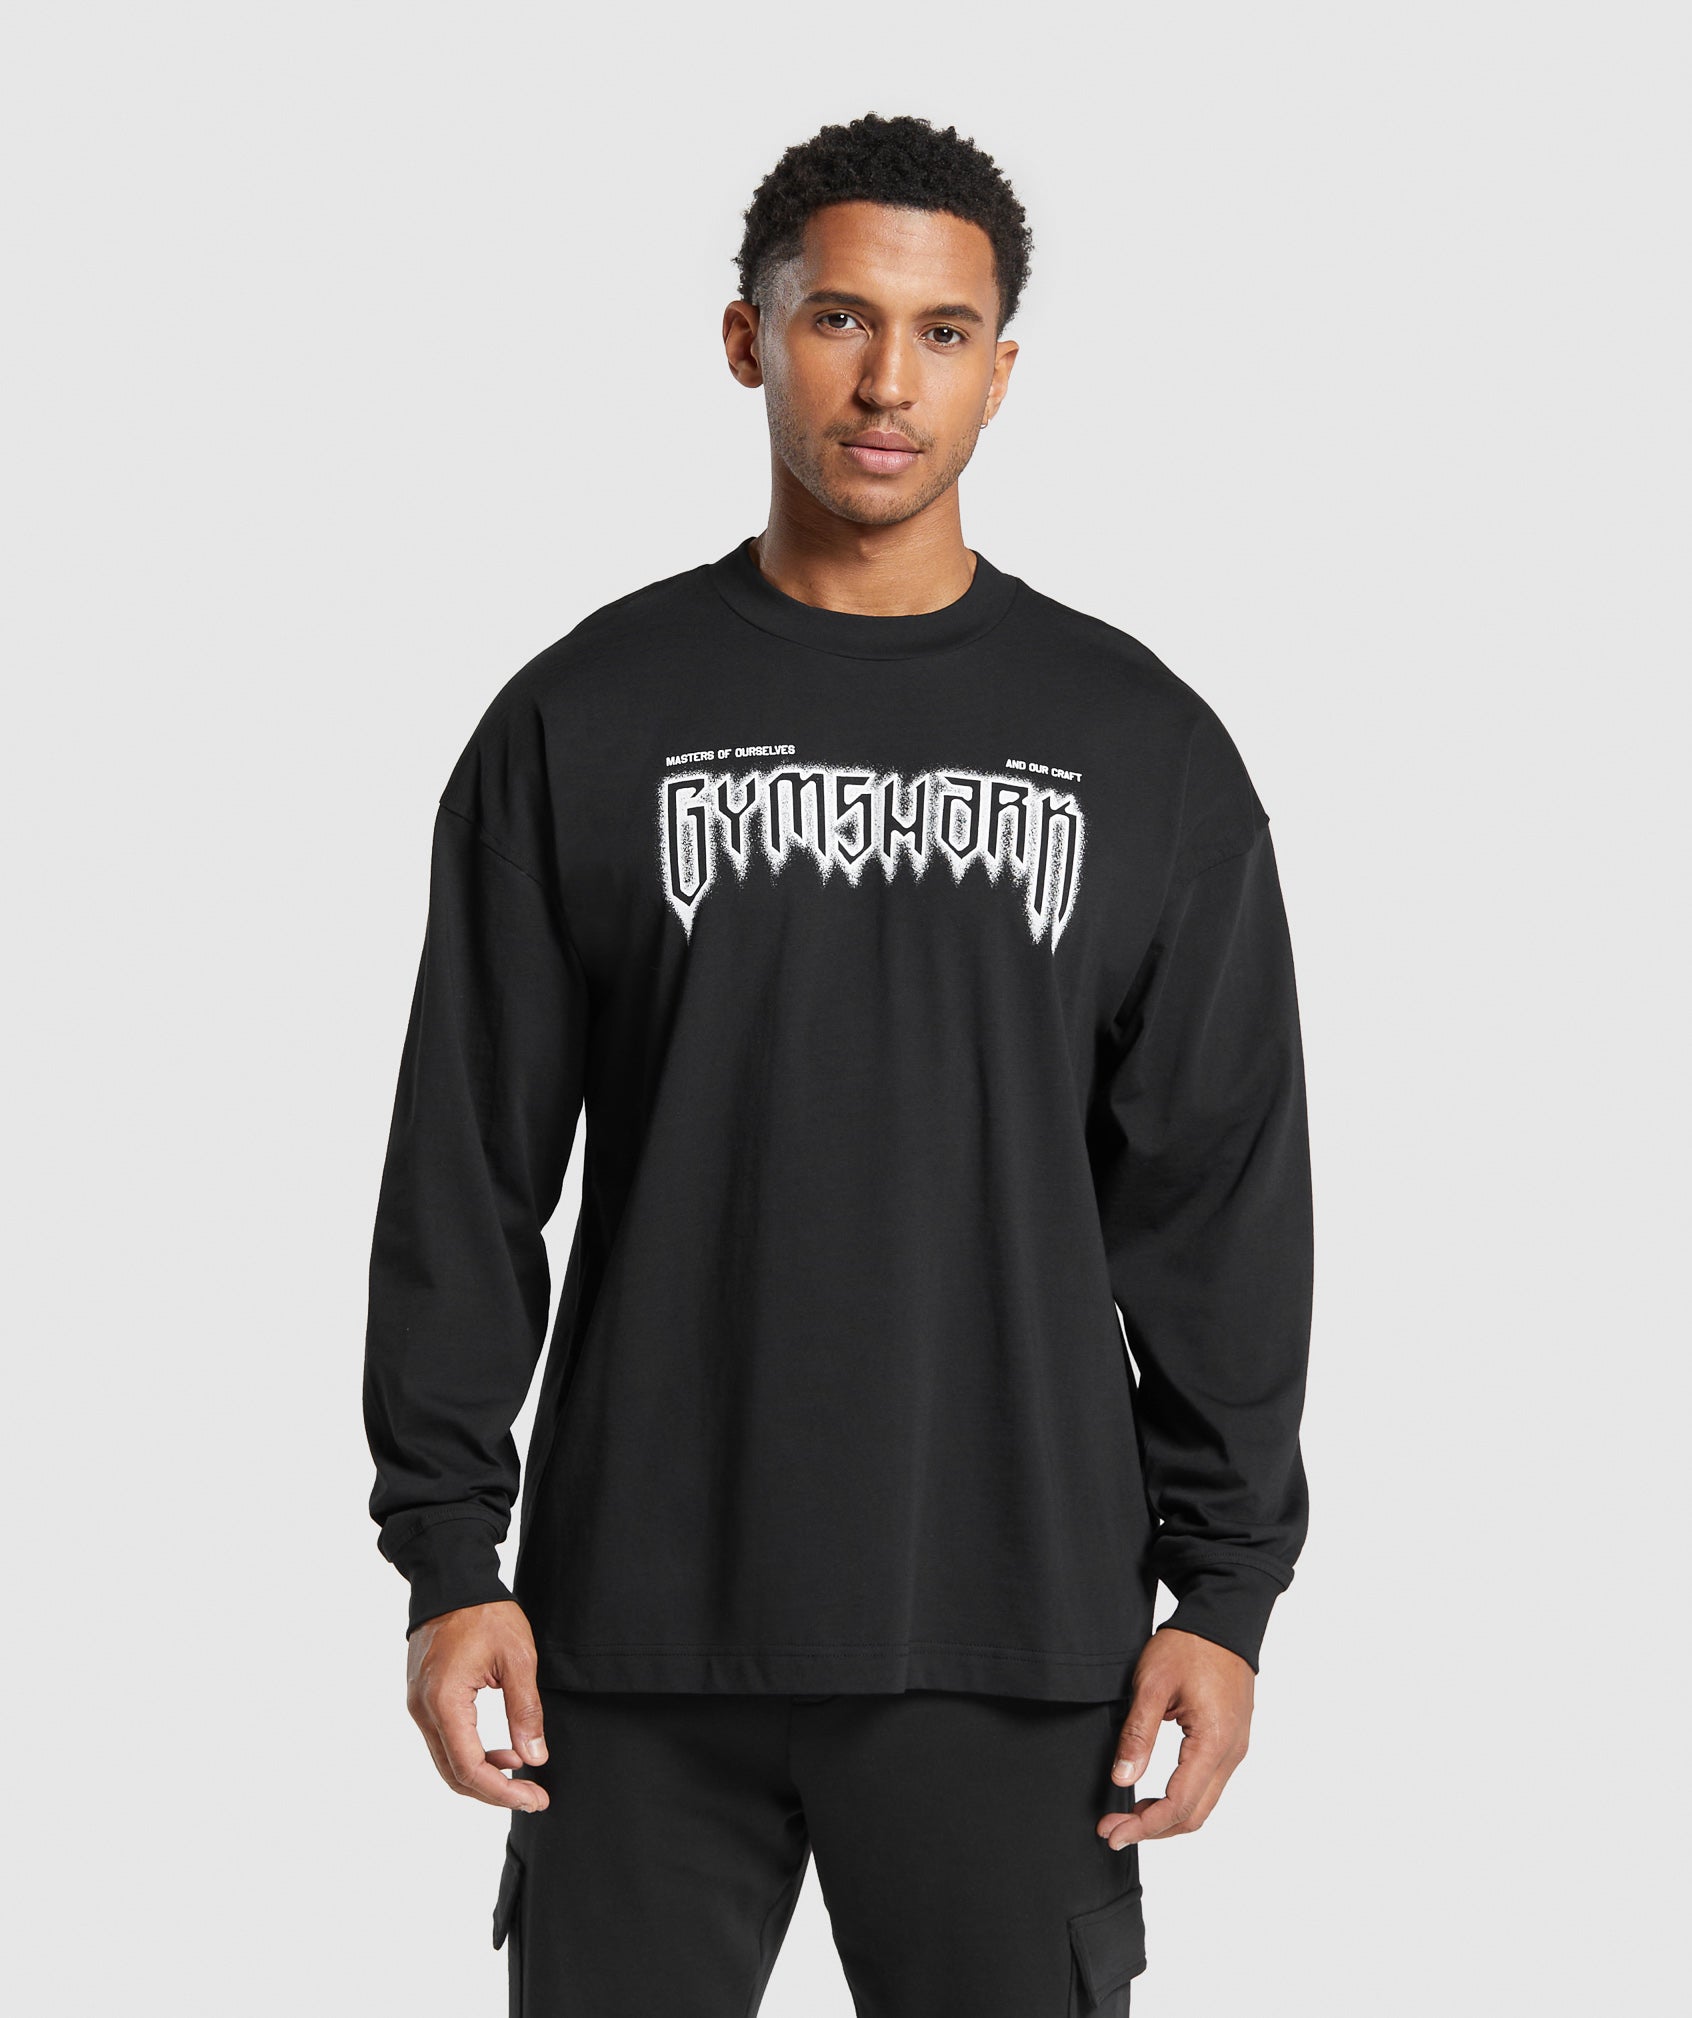 Masters of Our Craft Long Sleeve T-Shirt in Black